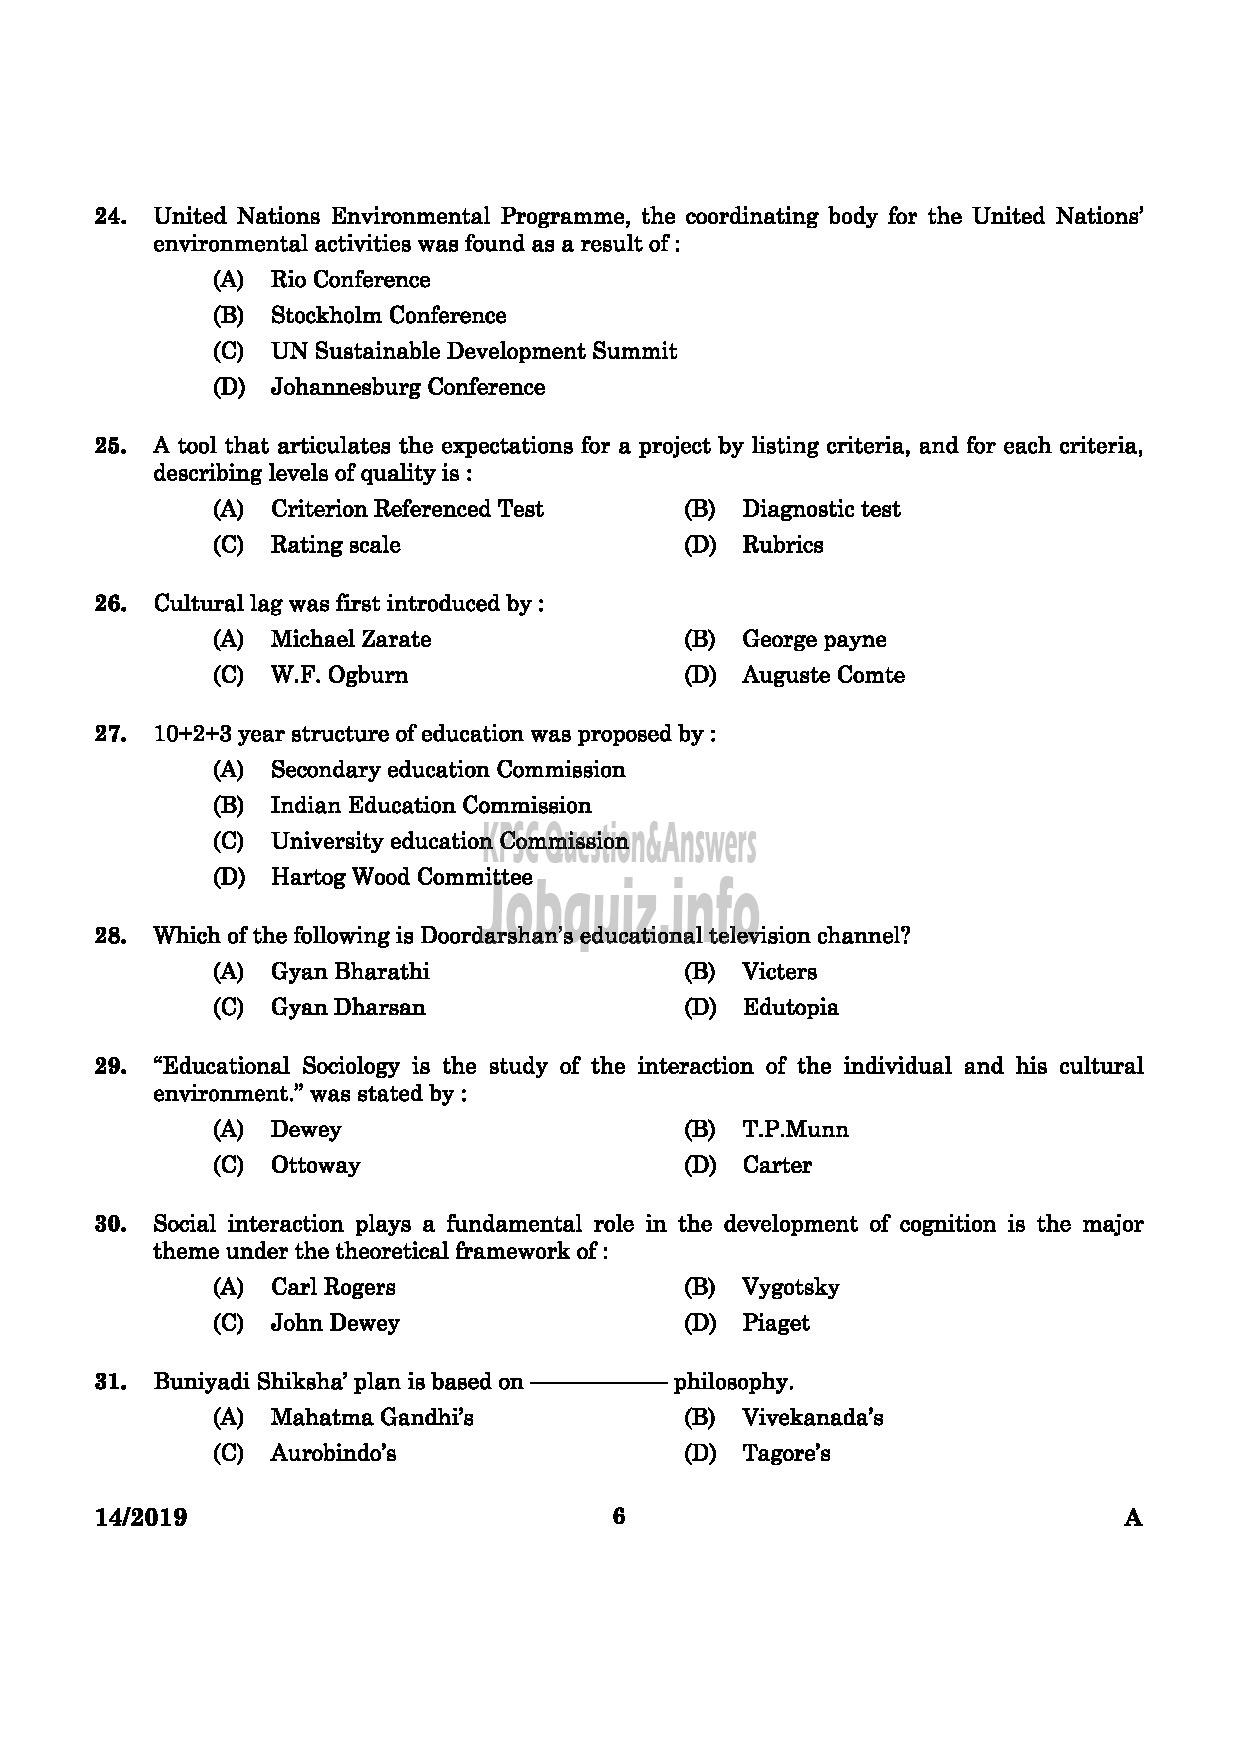 Kerala PSC Question Paper - SPECIAL TEACHER HOME FOR MENTALLY DEFICIENT CHILDREN SOCIAL JUSTICE DEPARTMENT-4